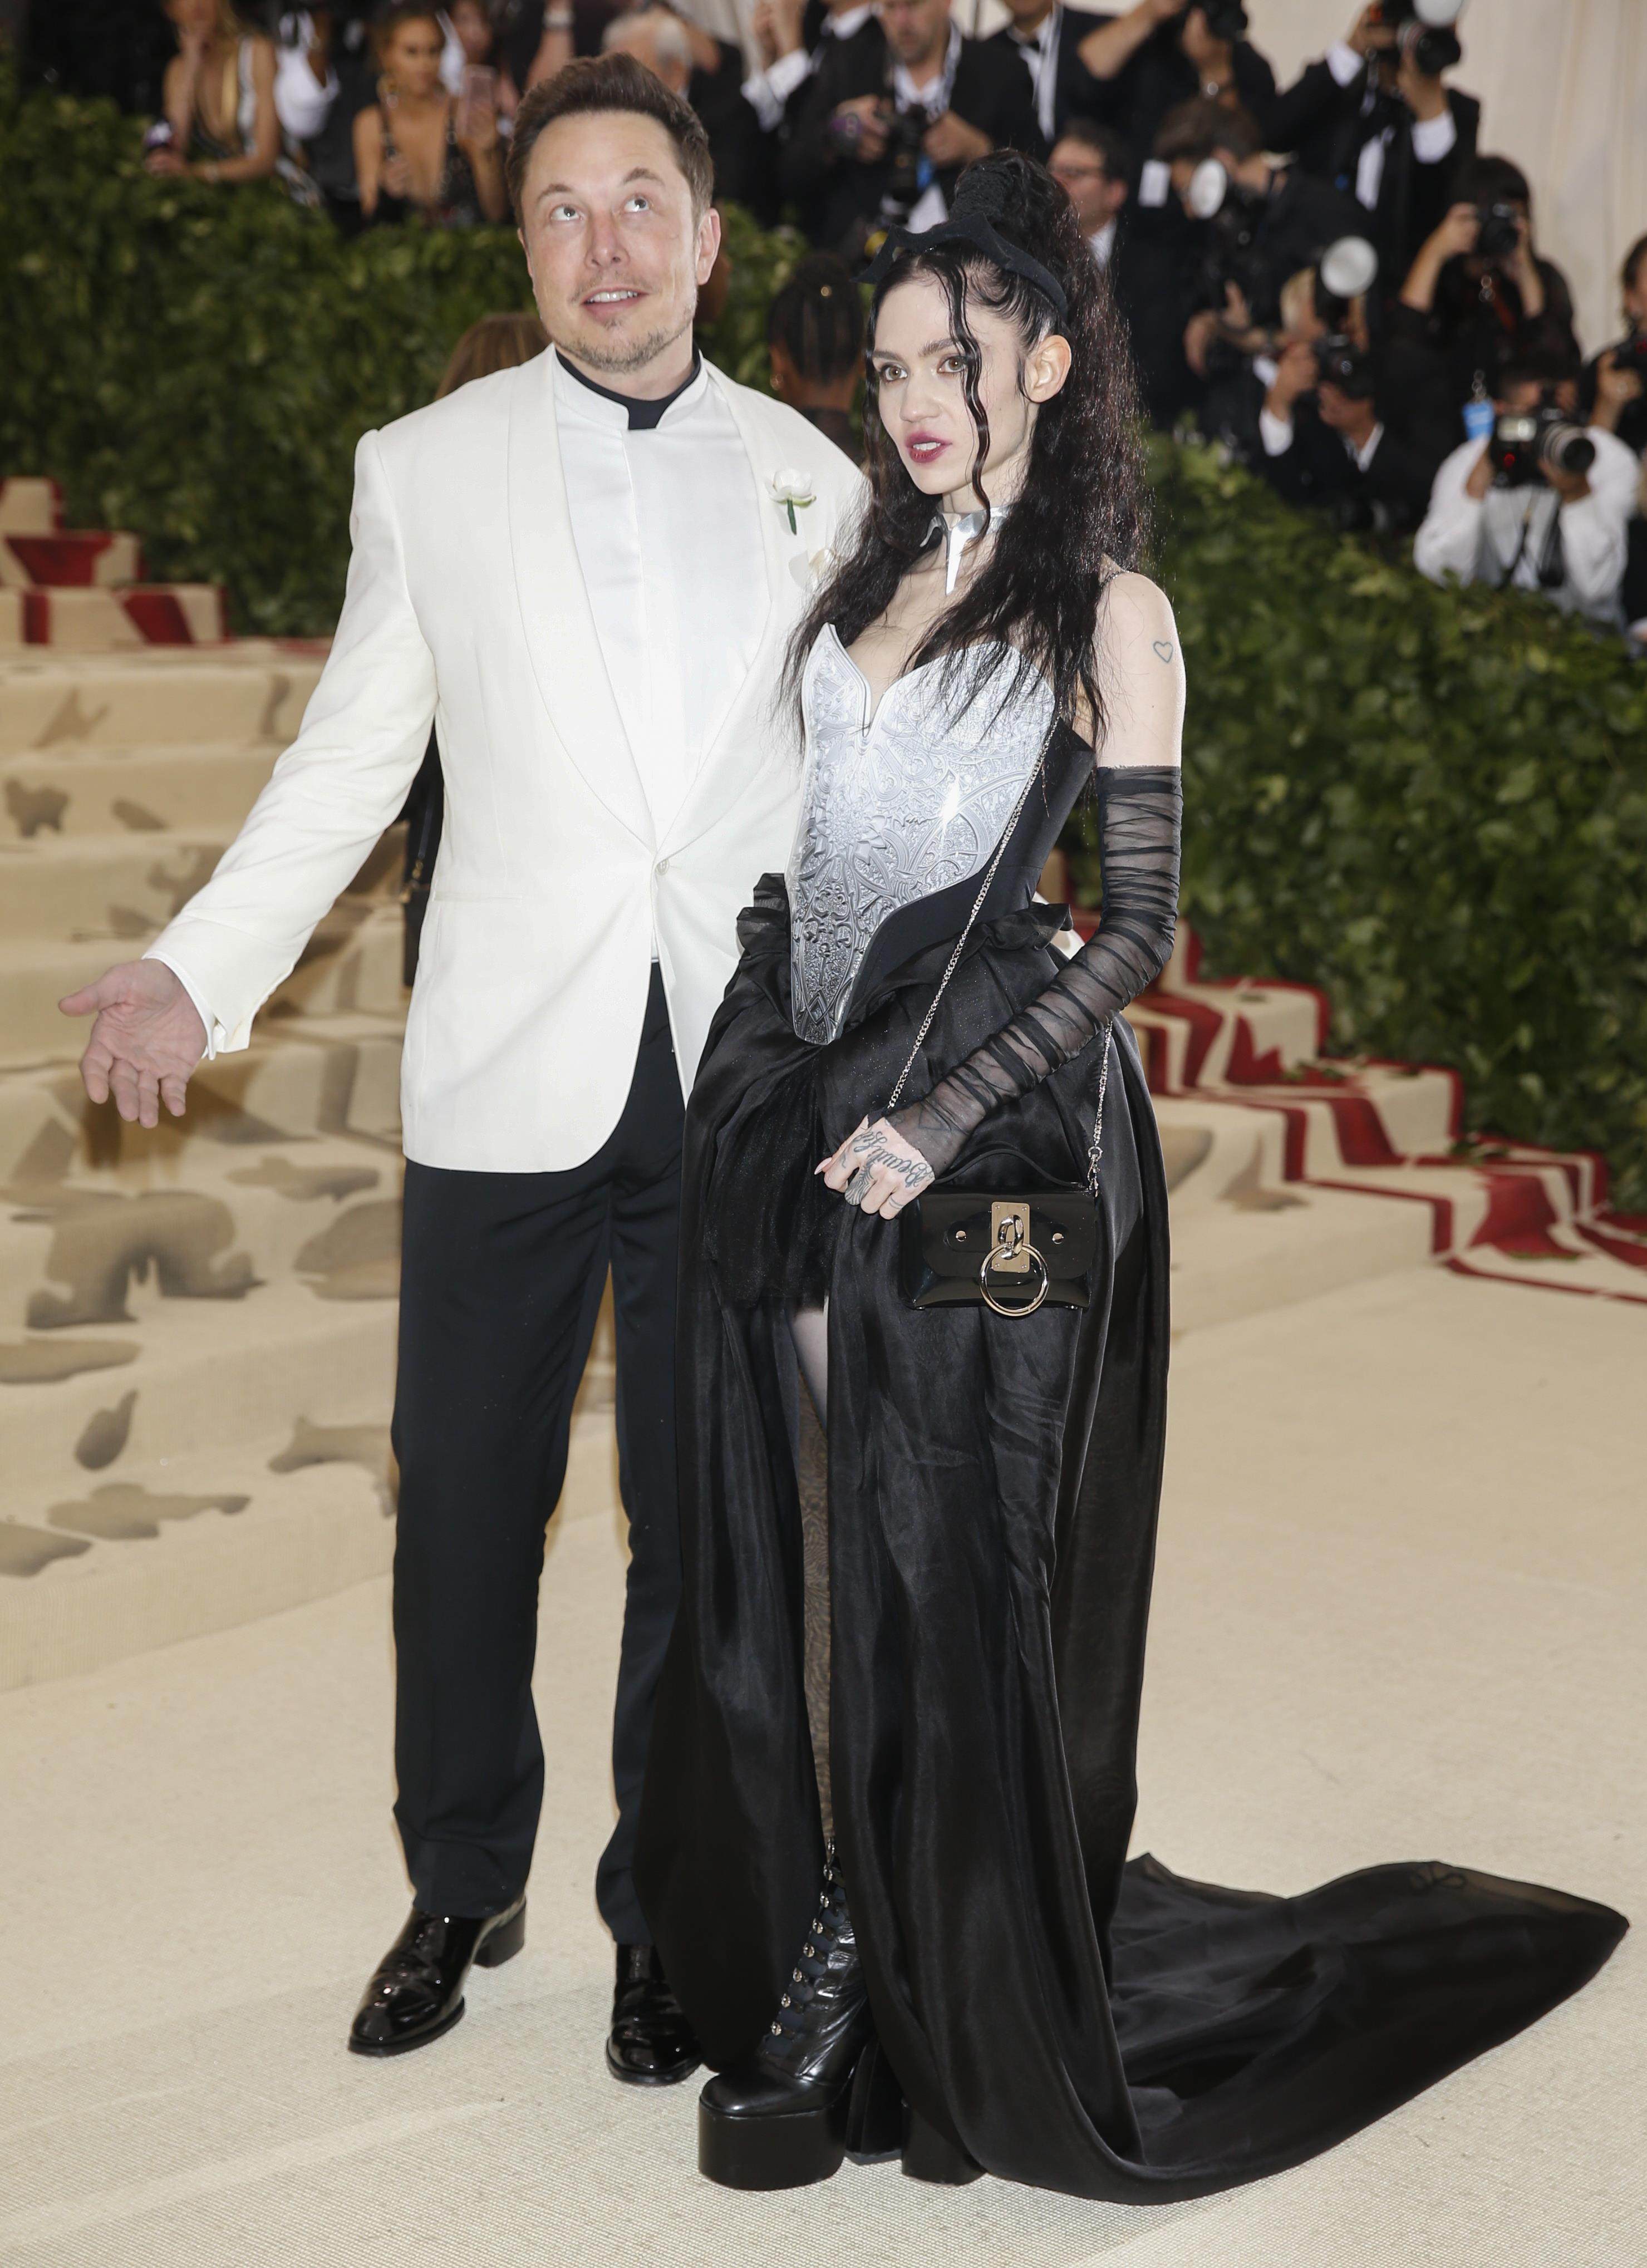 Elon Musk and Grimes arrive at the Met Gala in New York in May 2018. Photo: Reuters